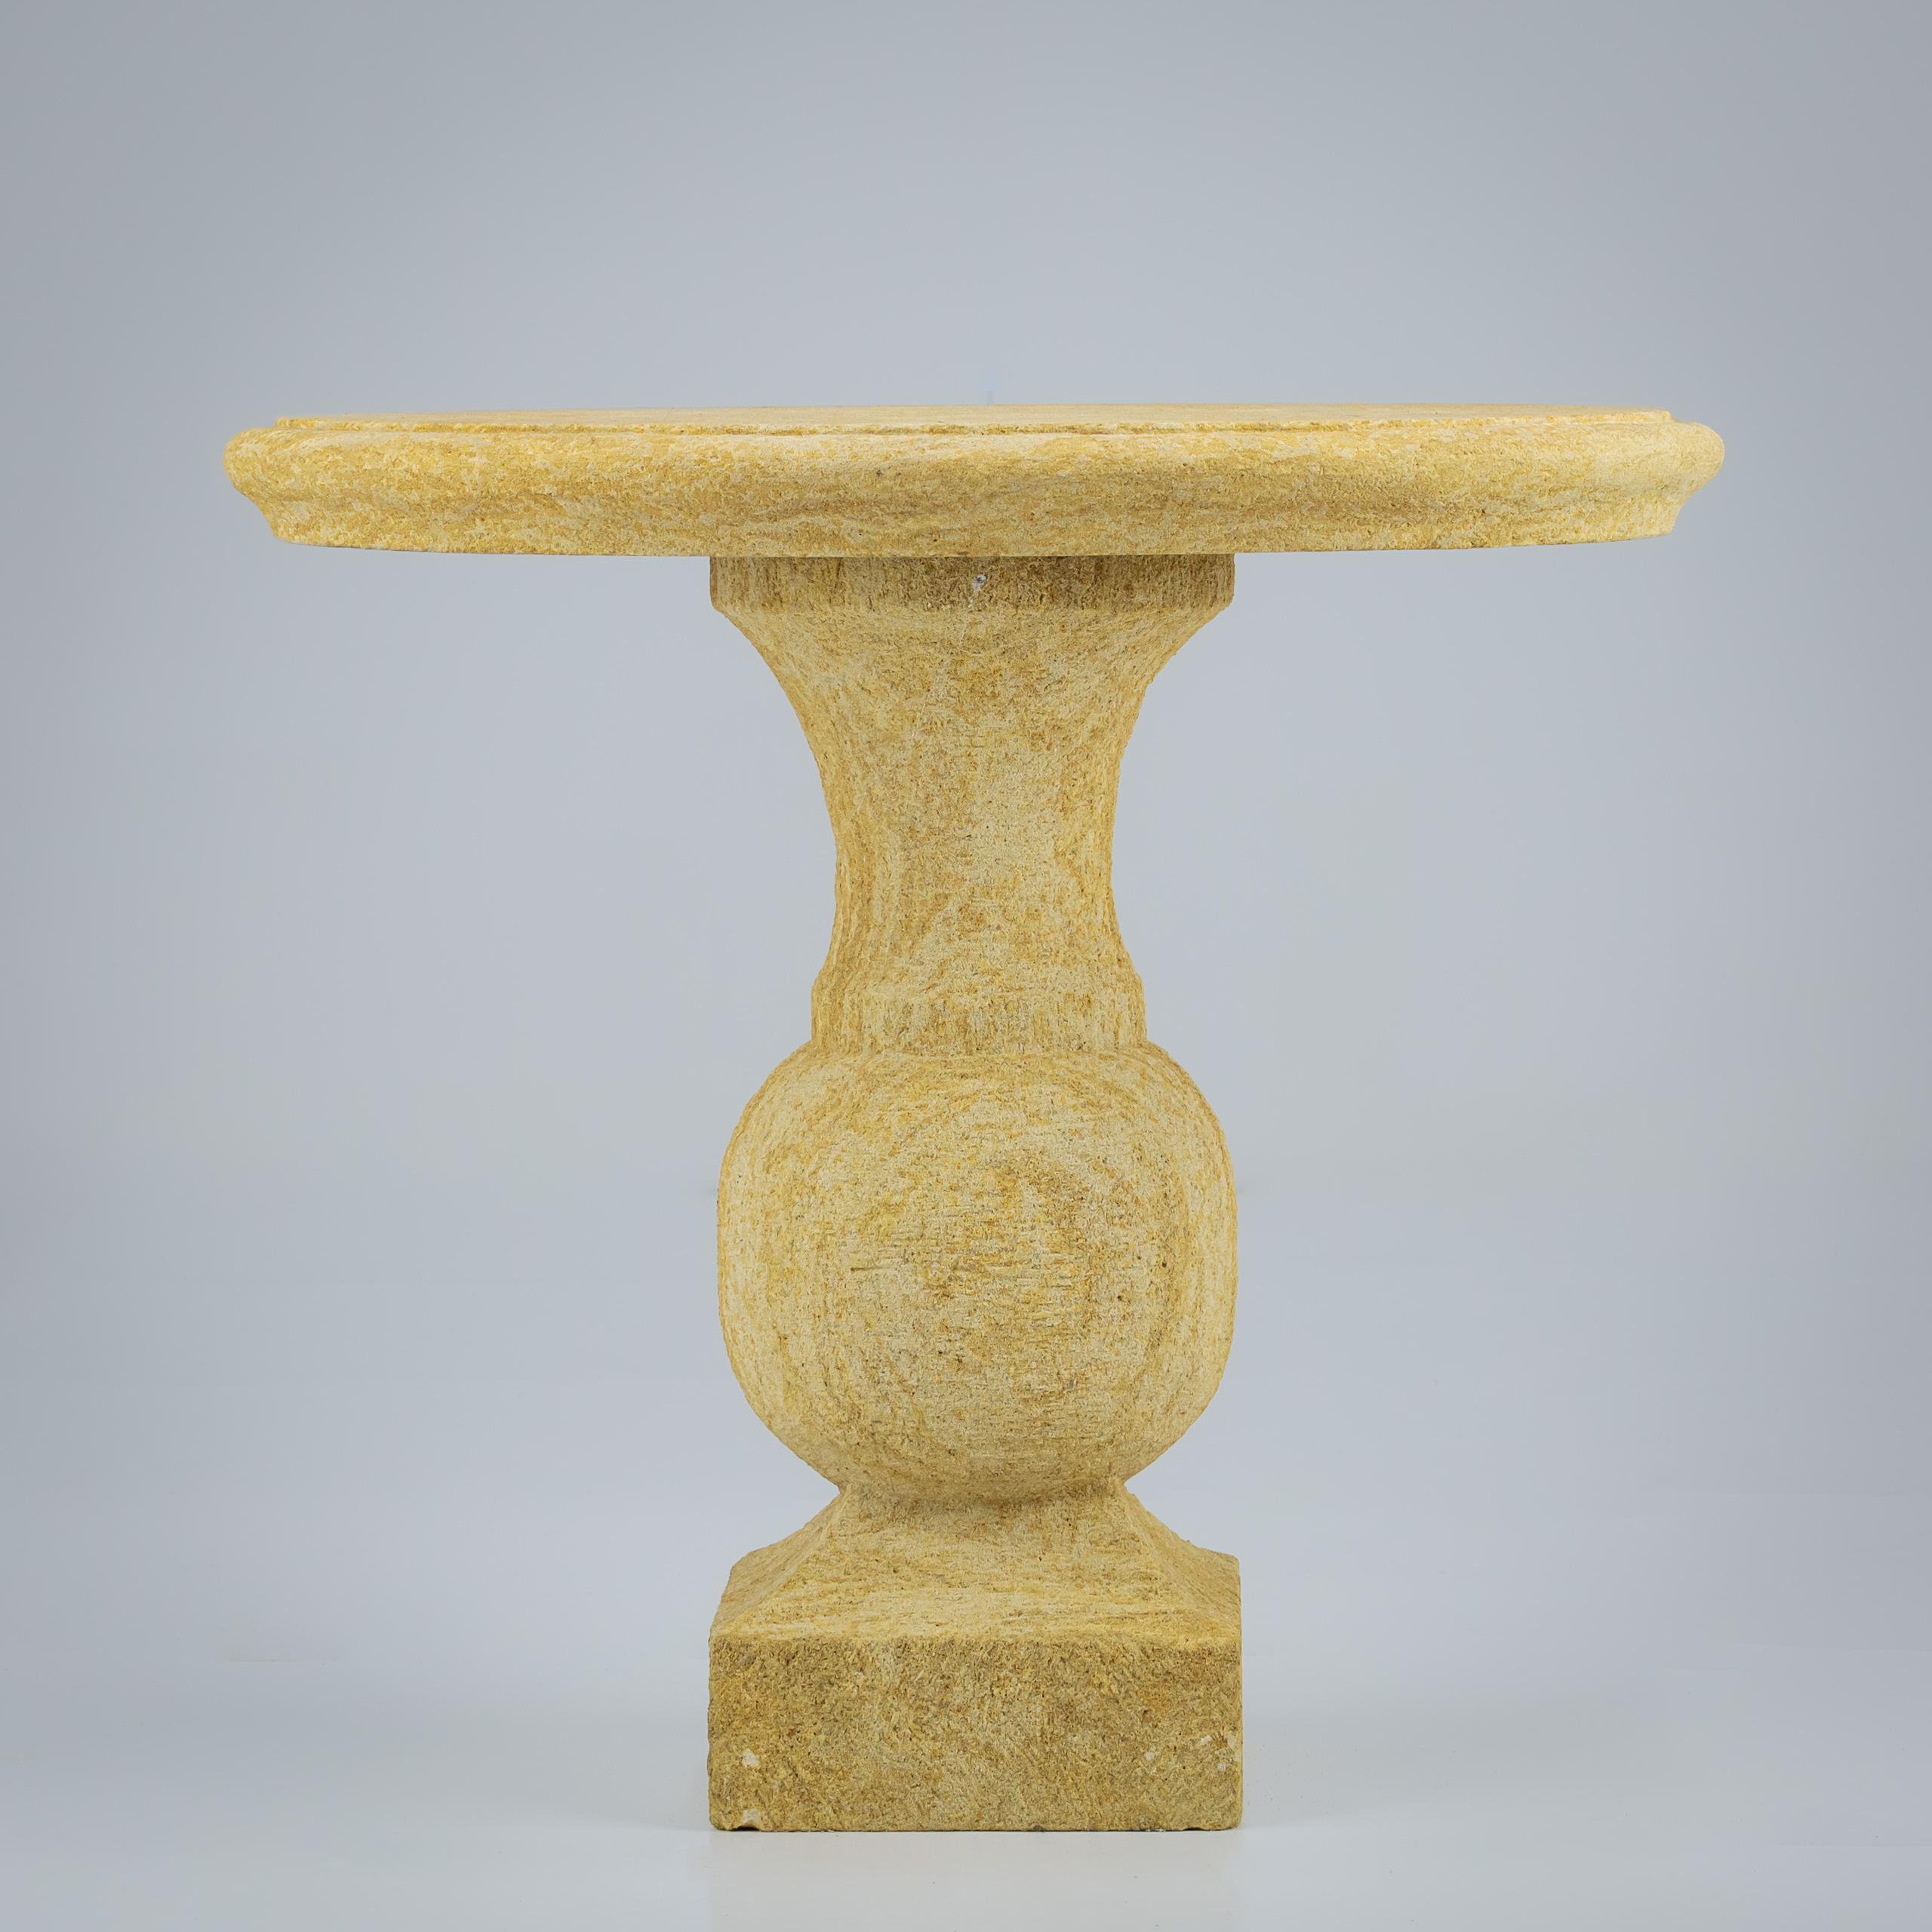 Carved Golden Limestone baluster Table. in two sections, with simple, elegant understated form. Made in Sussex using unusual Golden Cotswold Limestone. Selected for its exceptional pinky golden pastel hue and appealing natural strata patterns. The